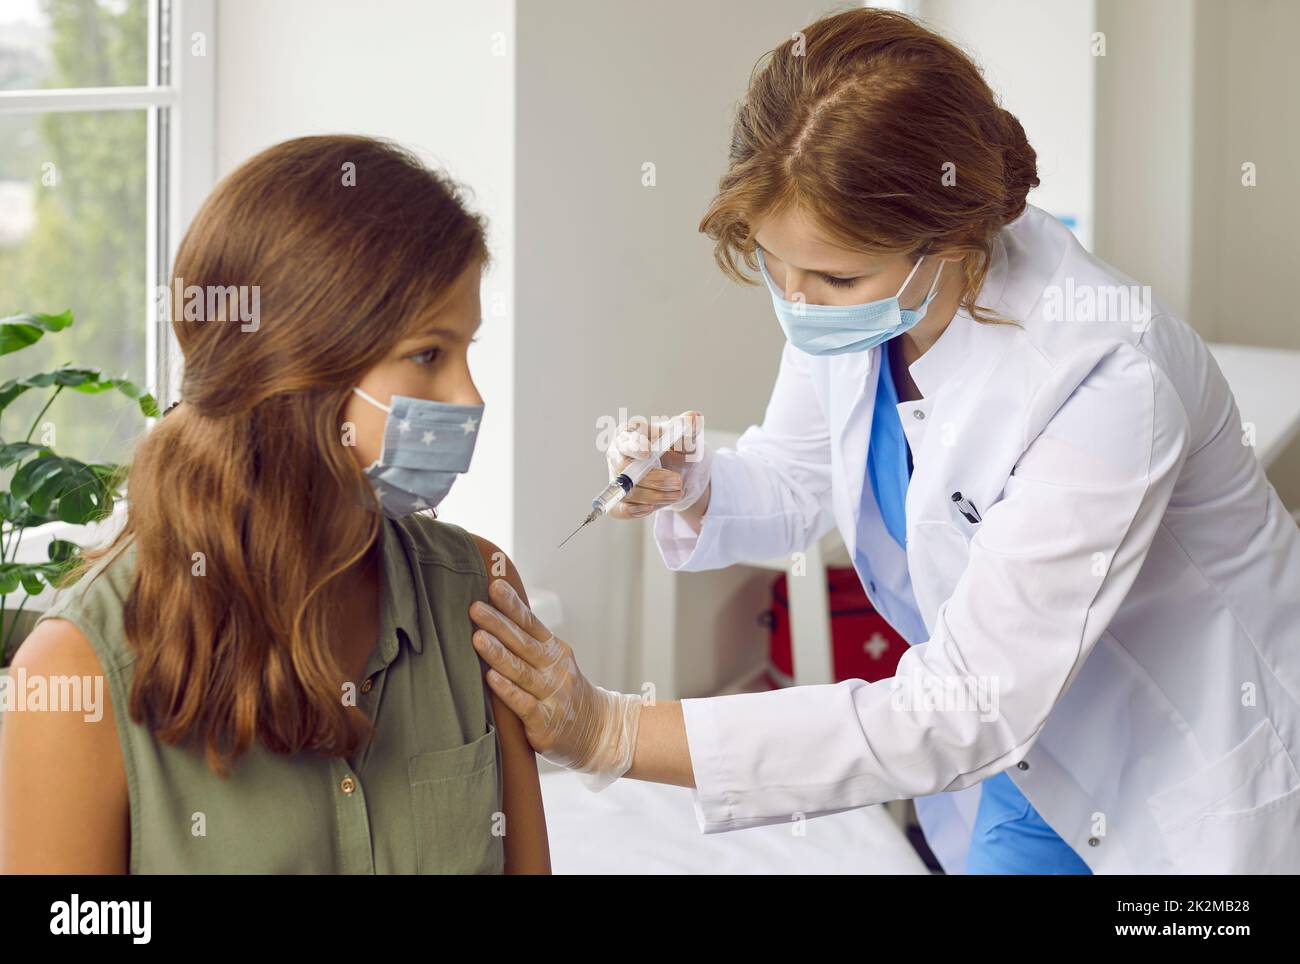 Female nurse or doctor in medical face mask giving vaccine injection to child patient Stock Photo